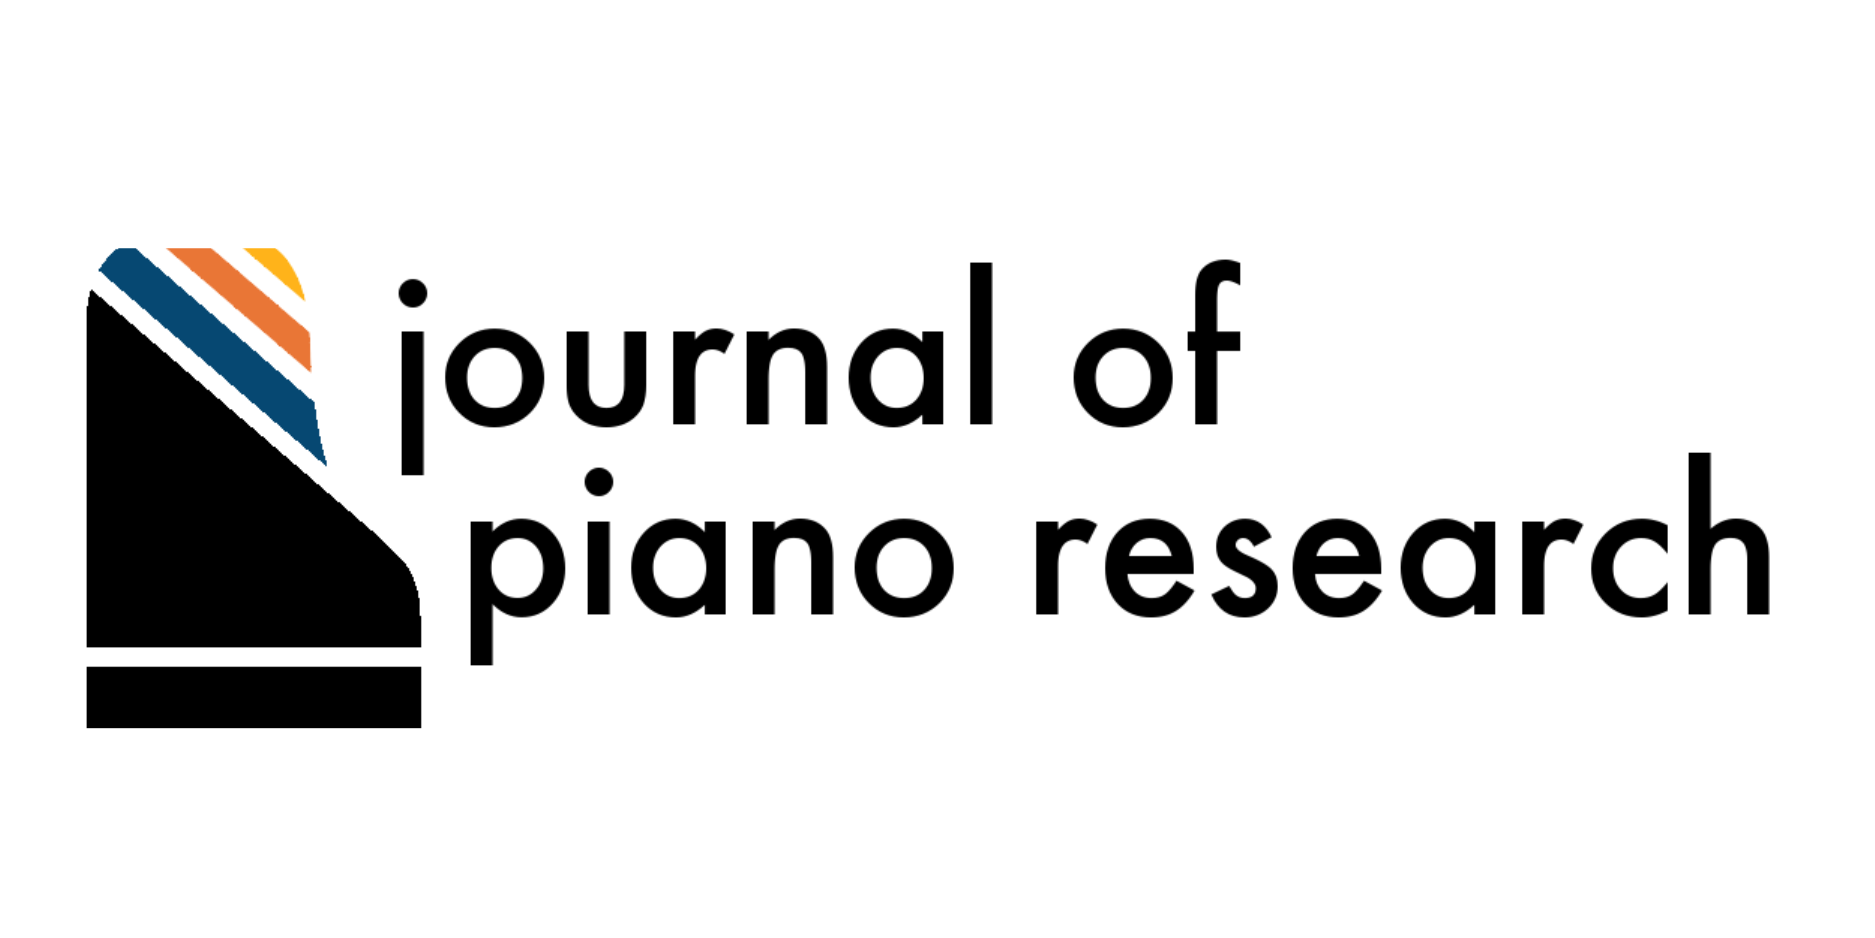 A Pianist’s Approach to Research